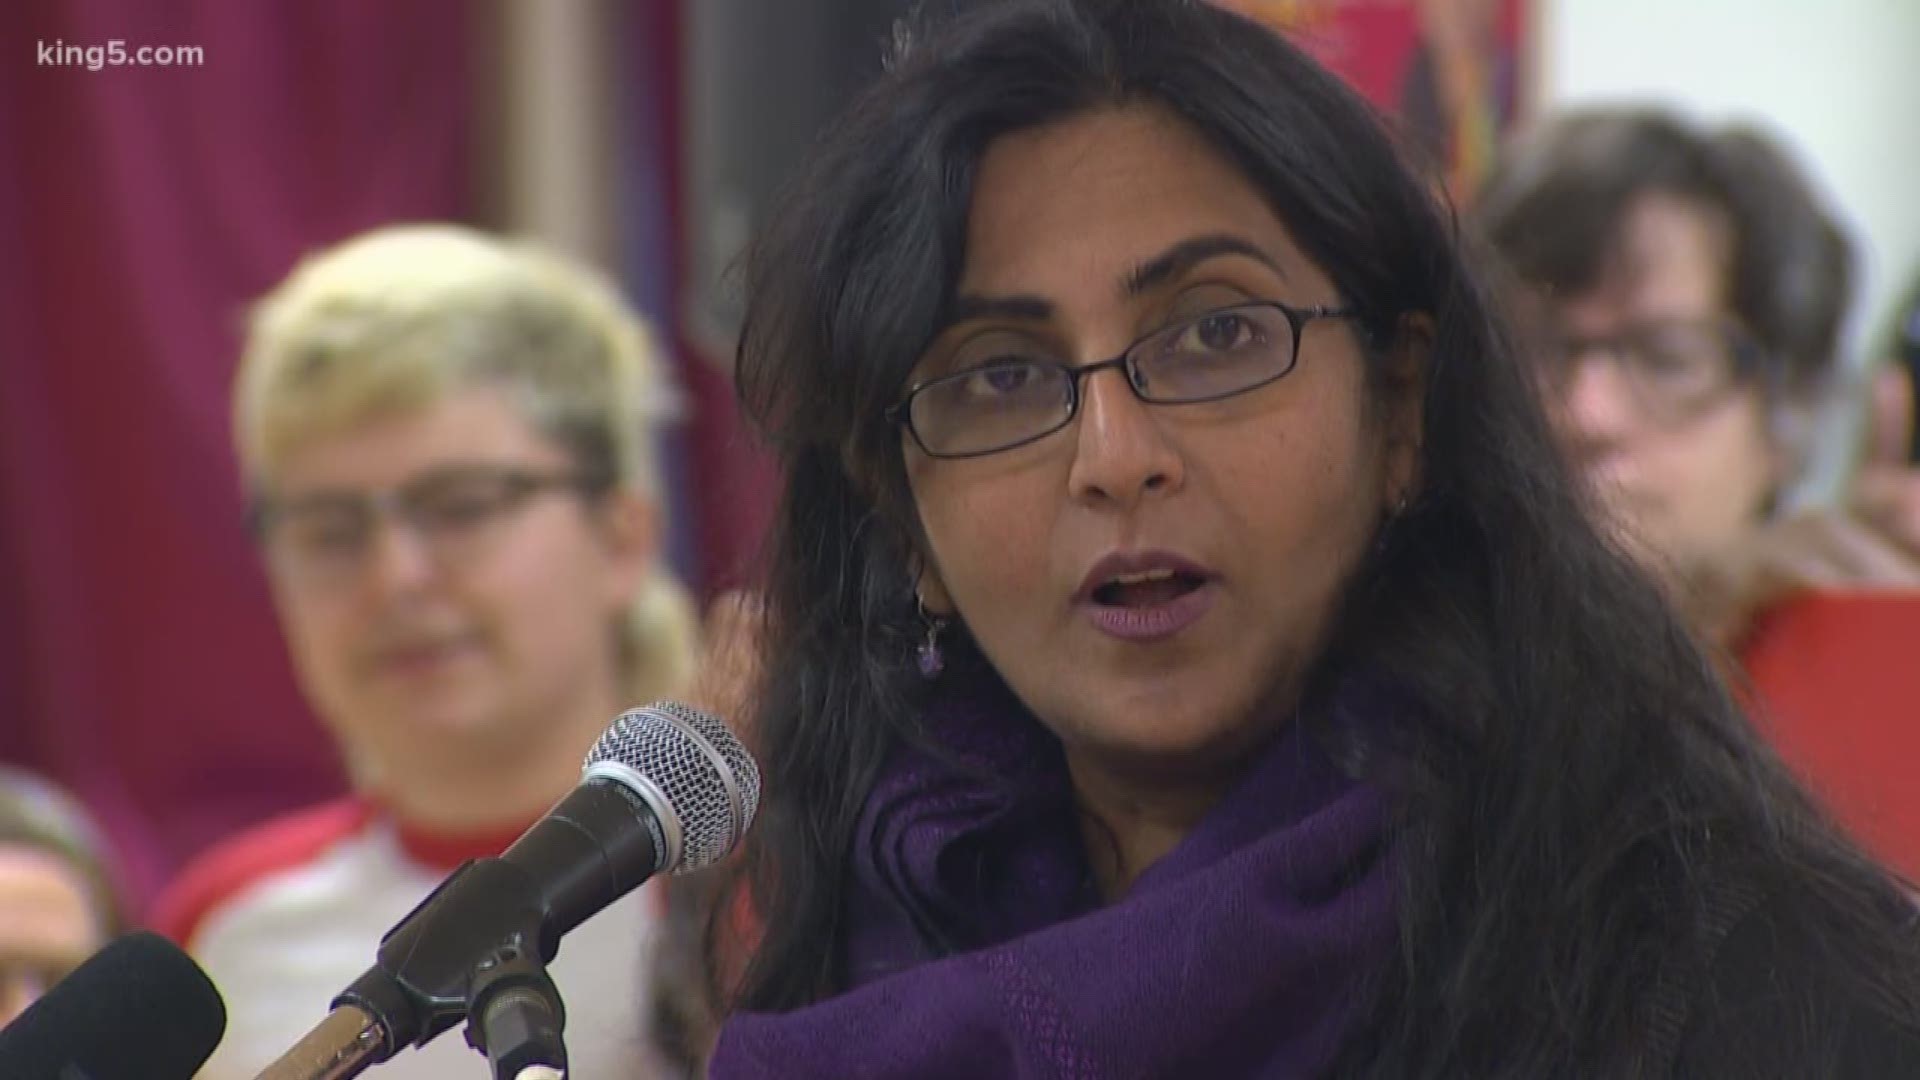 In a press conference Saturday, incumbent Kshama Sawant declared victory. However, there are still more ballots that need to be counted by King County officials.